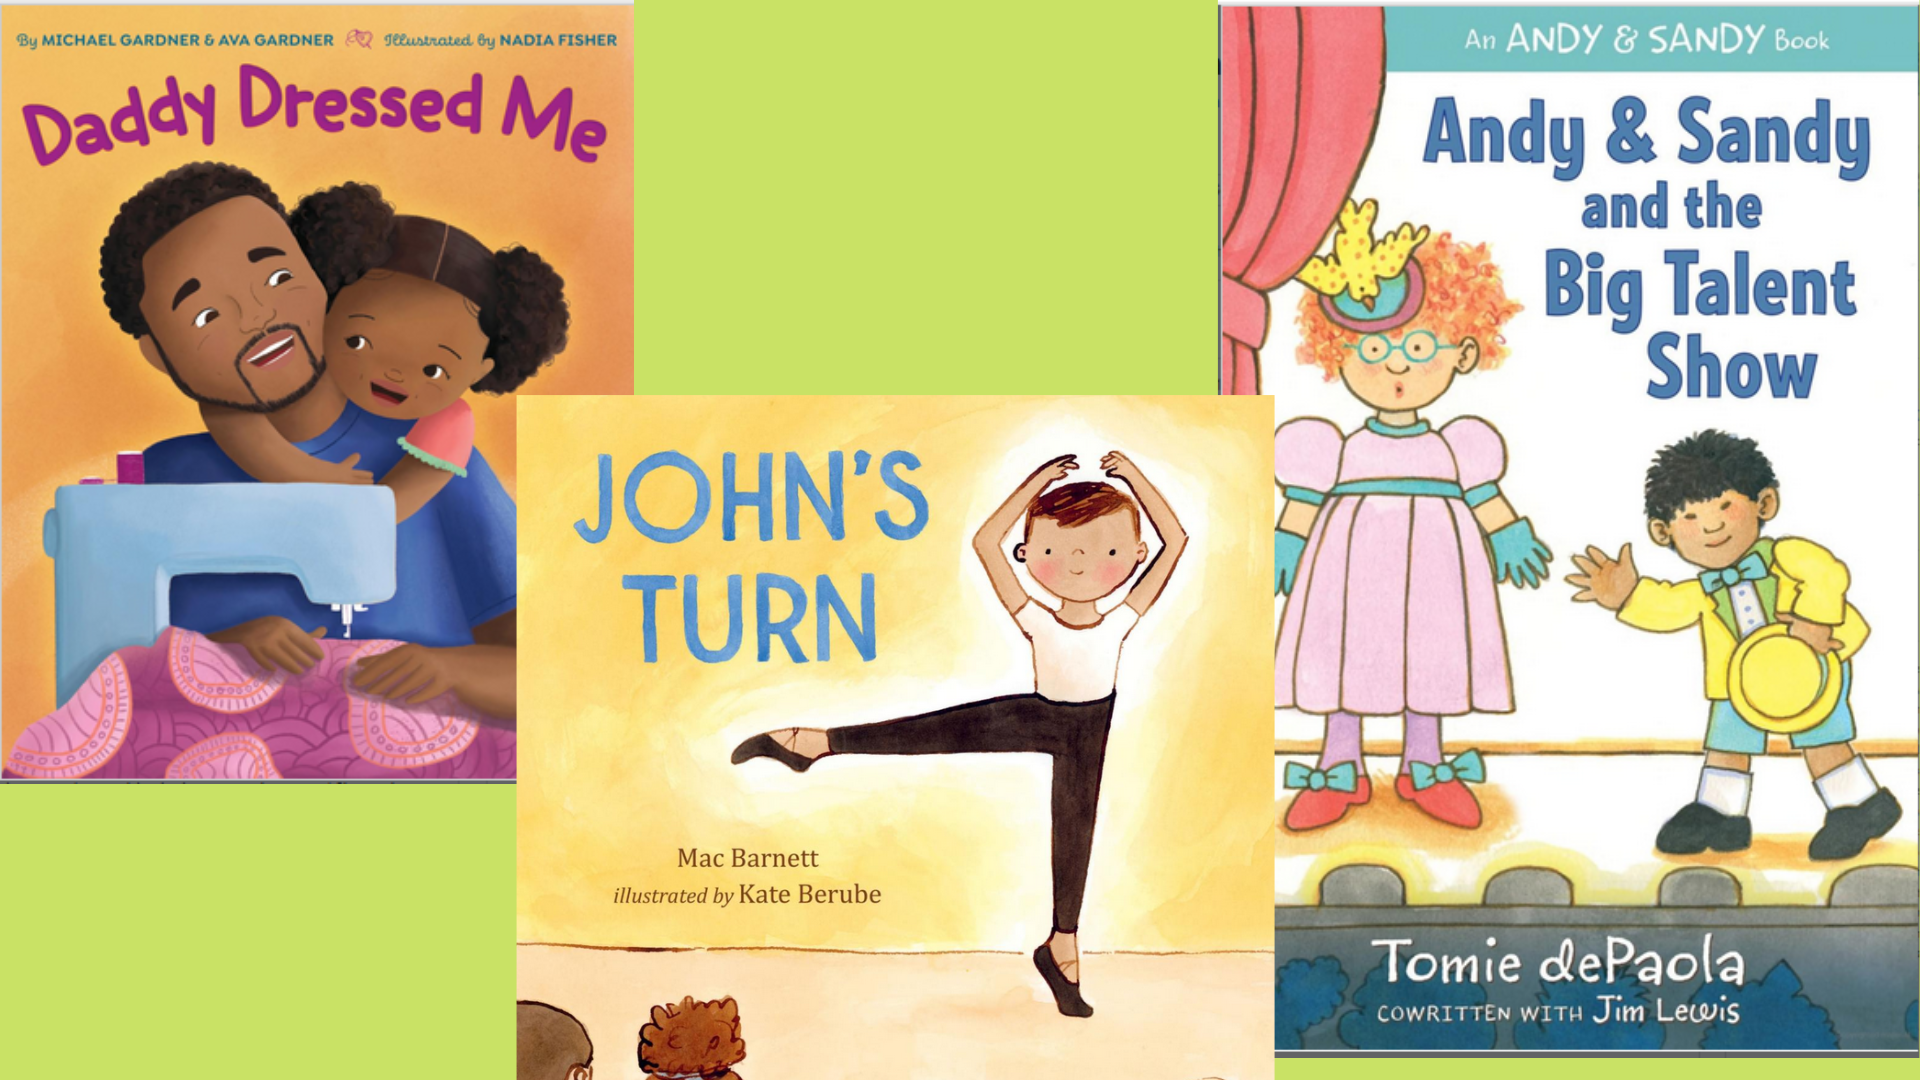 Three book covers,, on one a Black father and daughter hugging, on another a white boy ballerina dancing, and on a third, an Asian boy and white red-haired girl on stage.